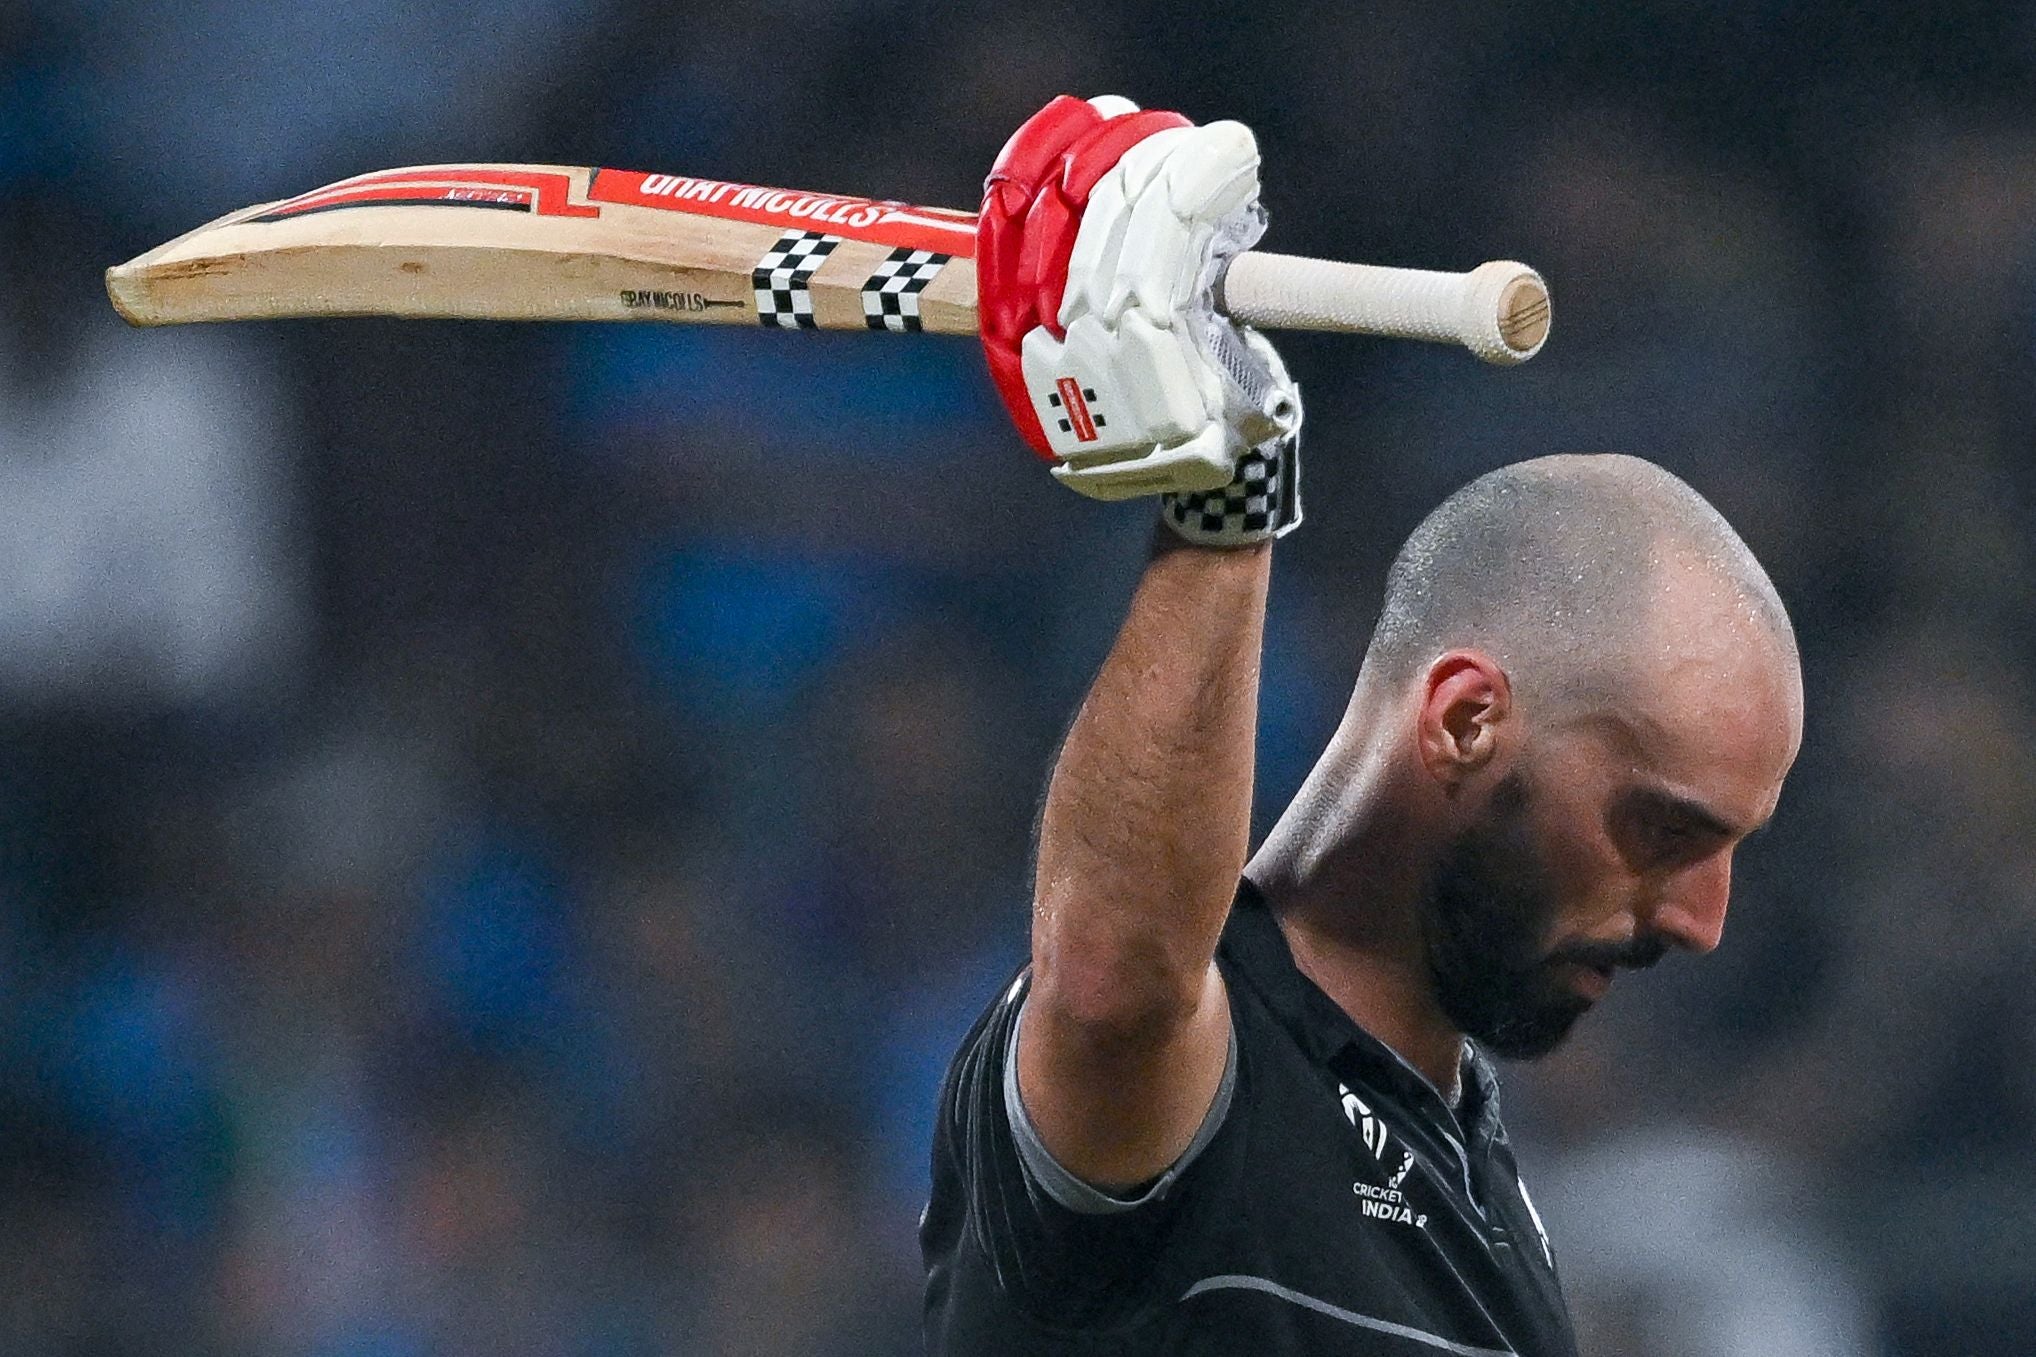 Daryl Mitchell scored an impressive century as New Zealand tried to chase the total